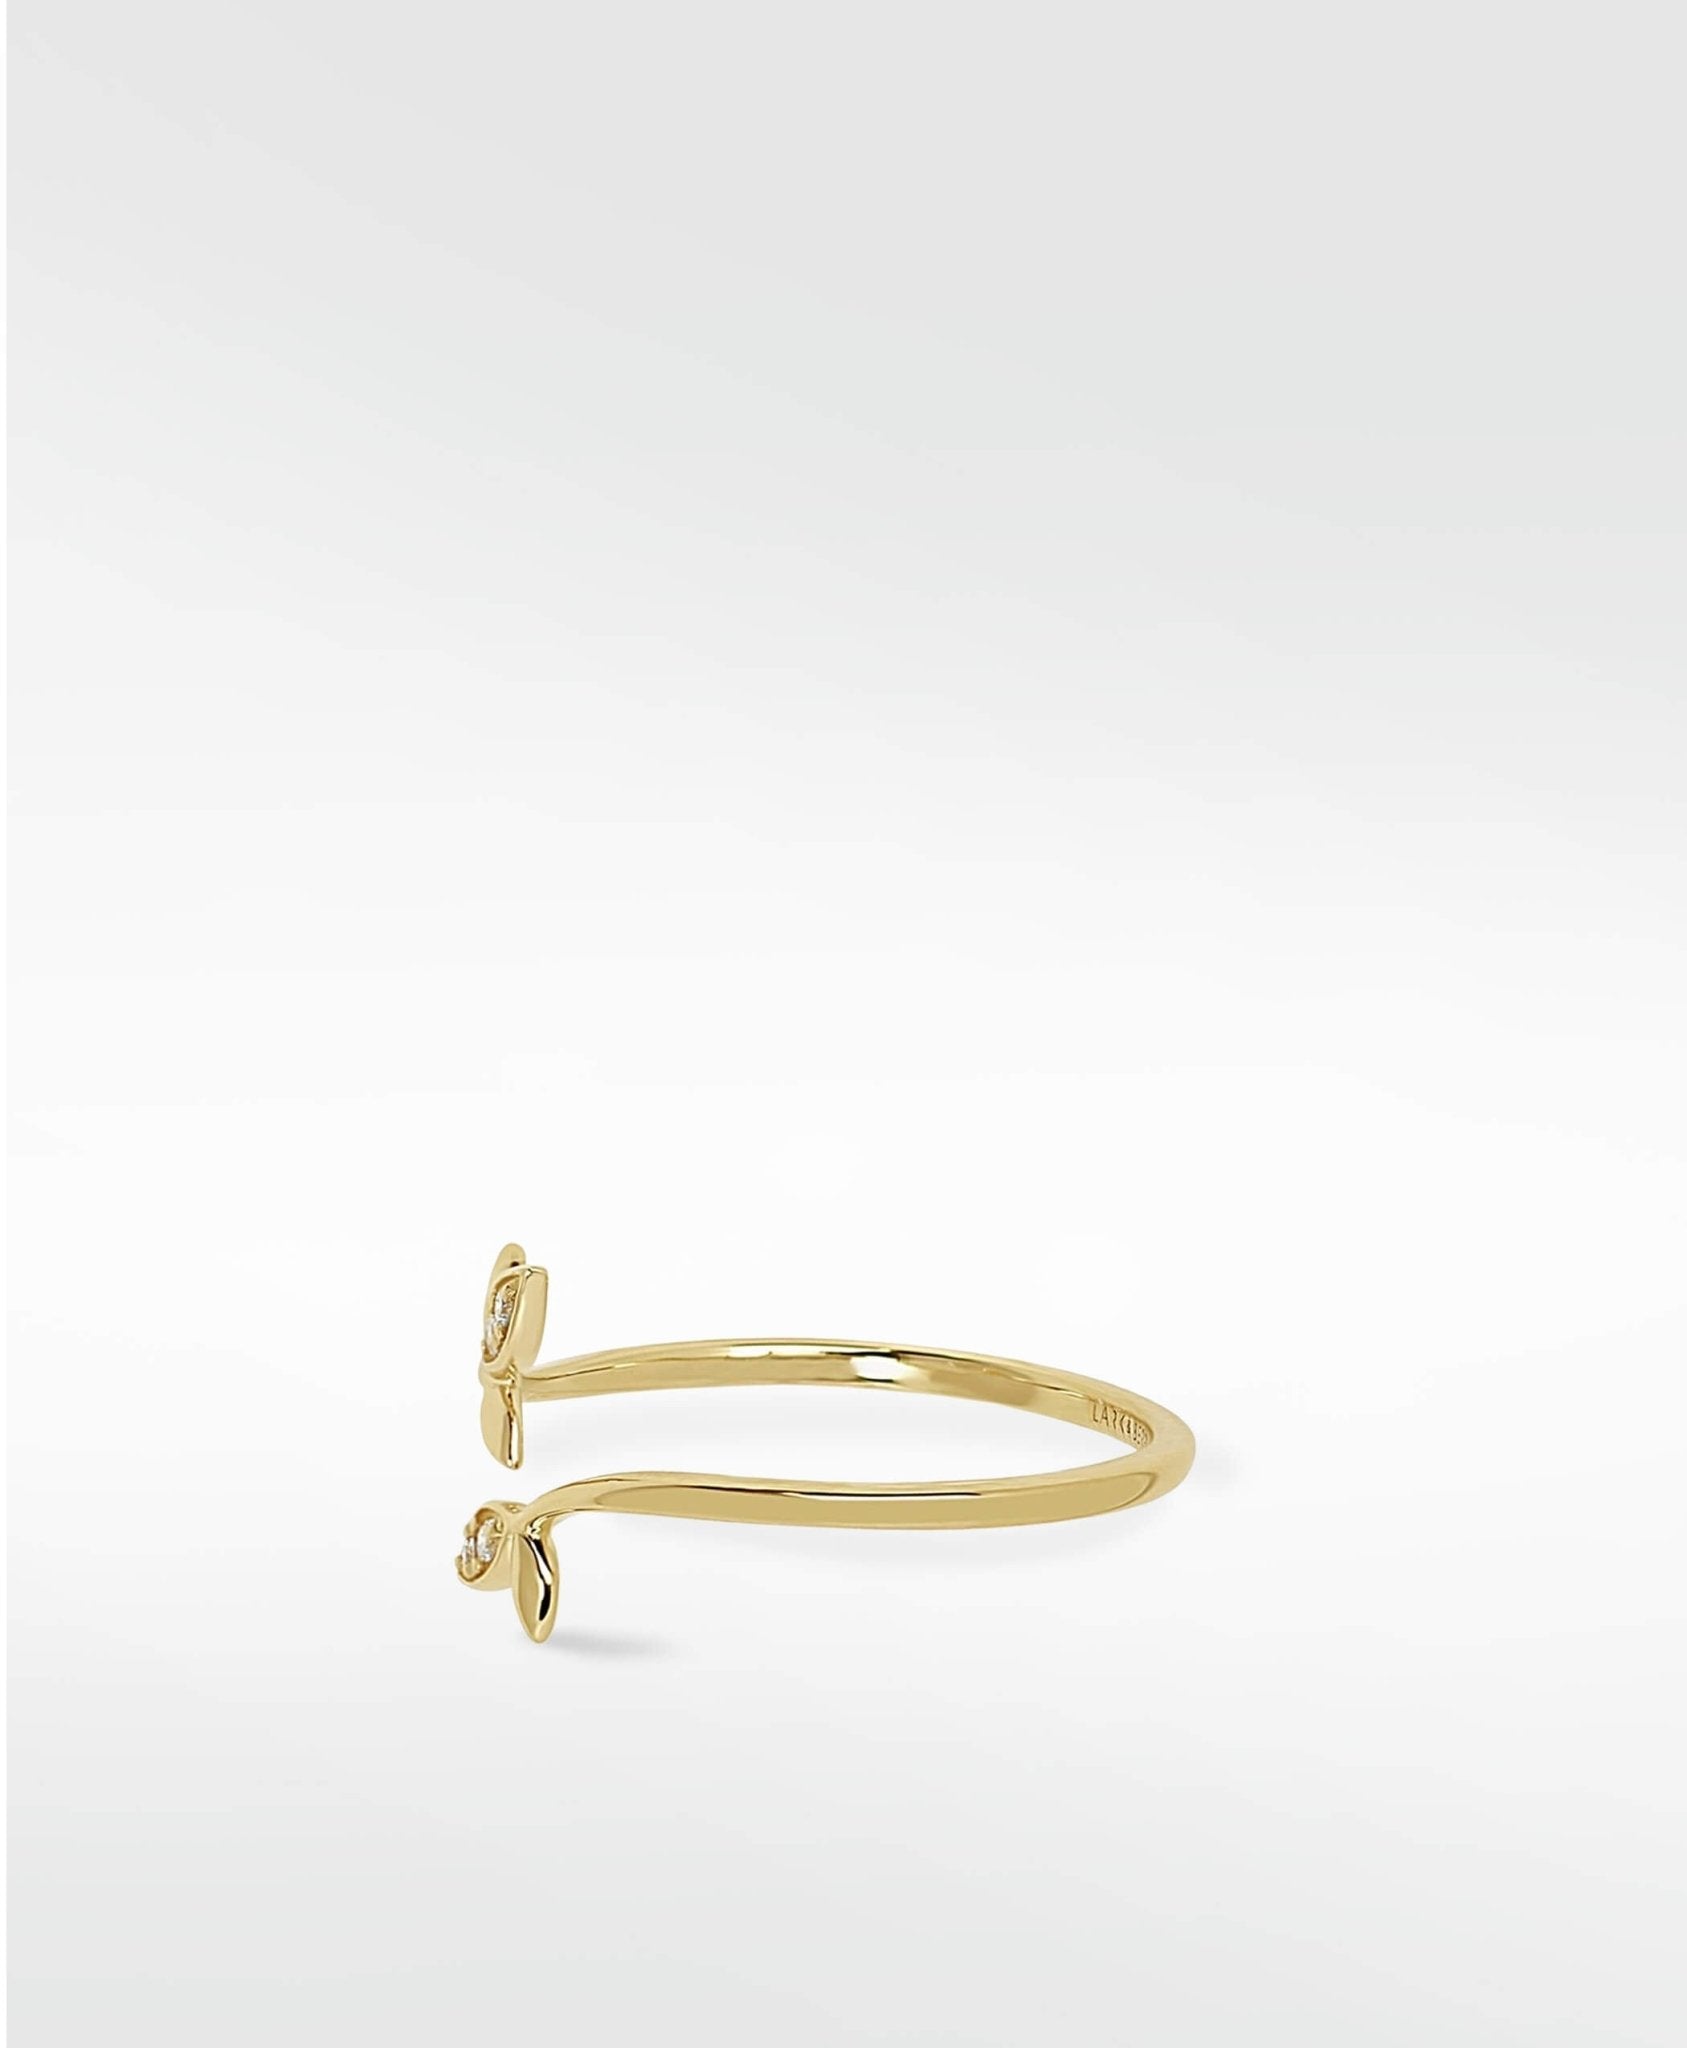 Alicia Diamond Open Leaf Ring in 14K Gold - Lark and Berry